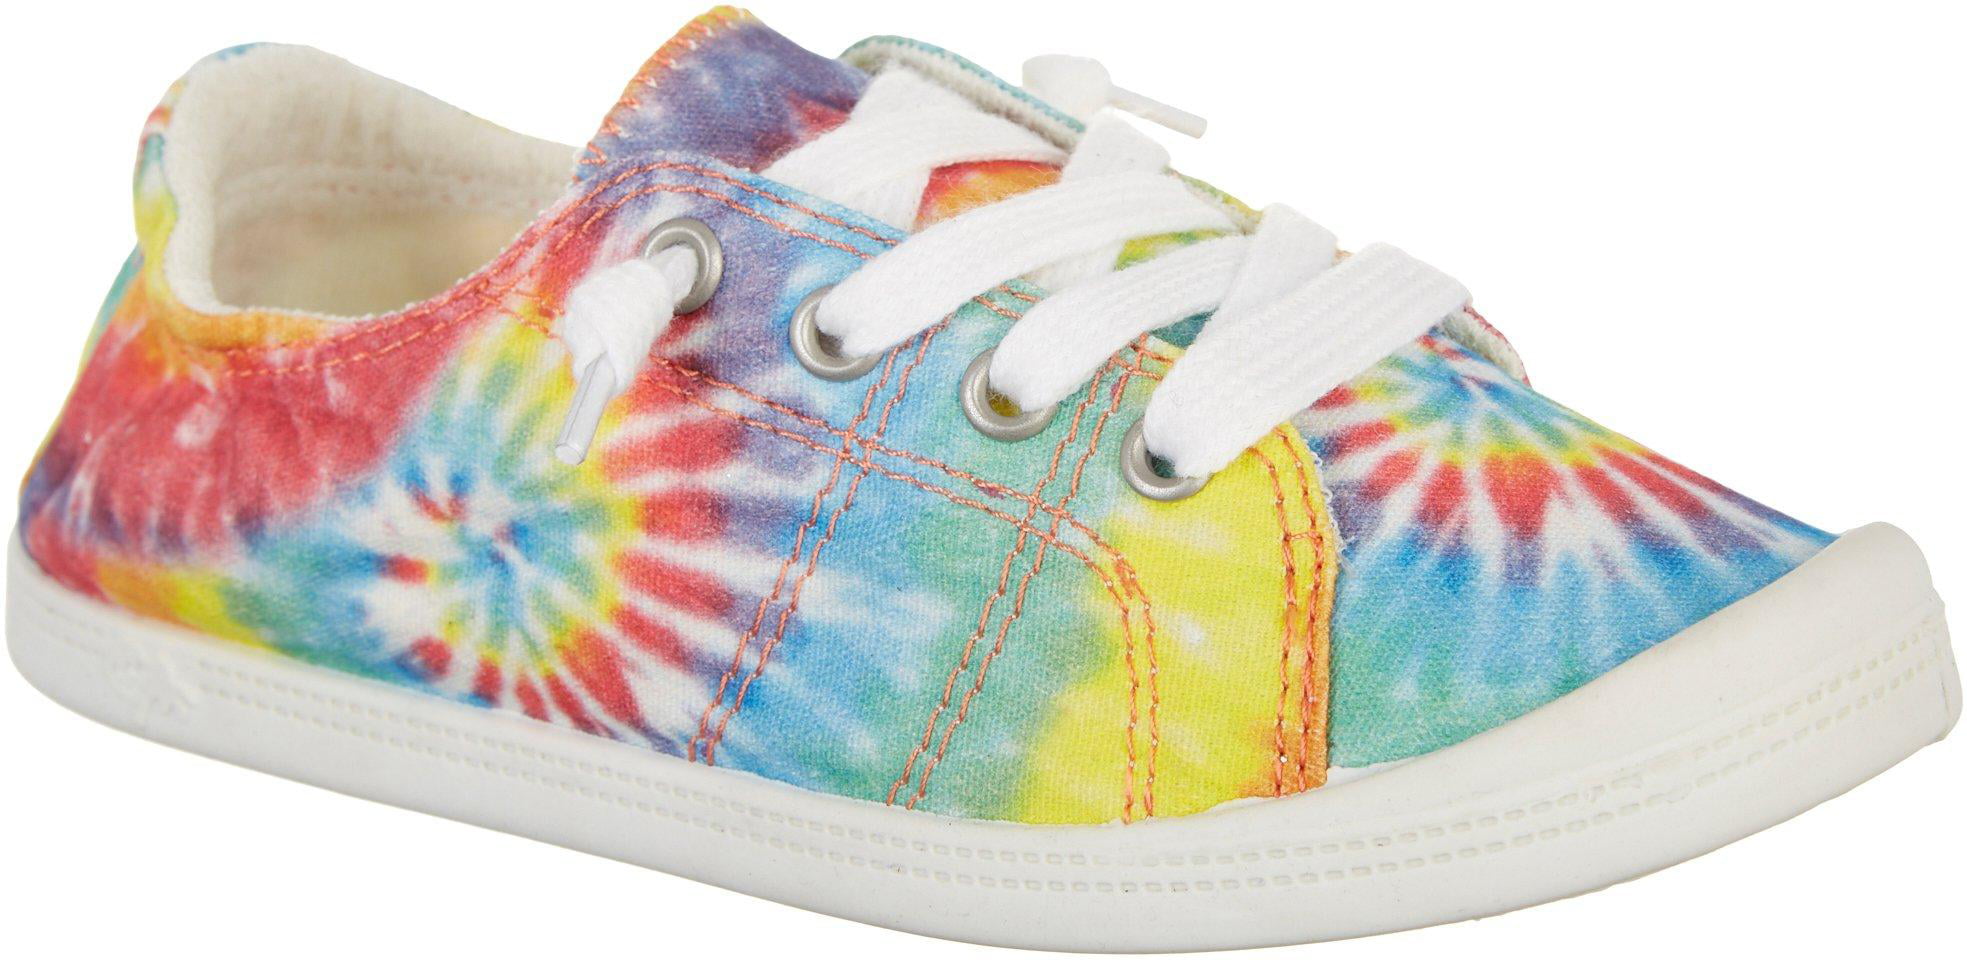 jellypop kids shoes